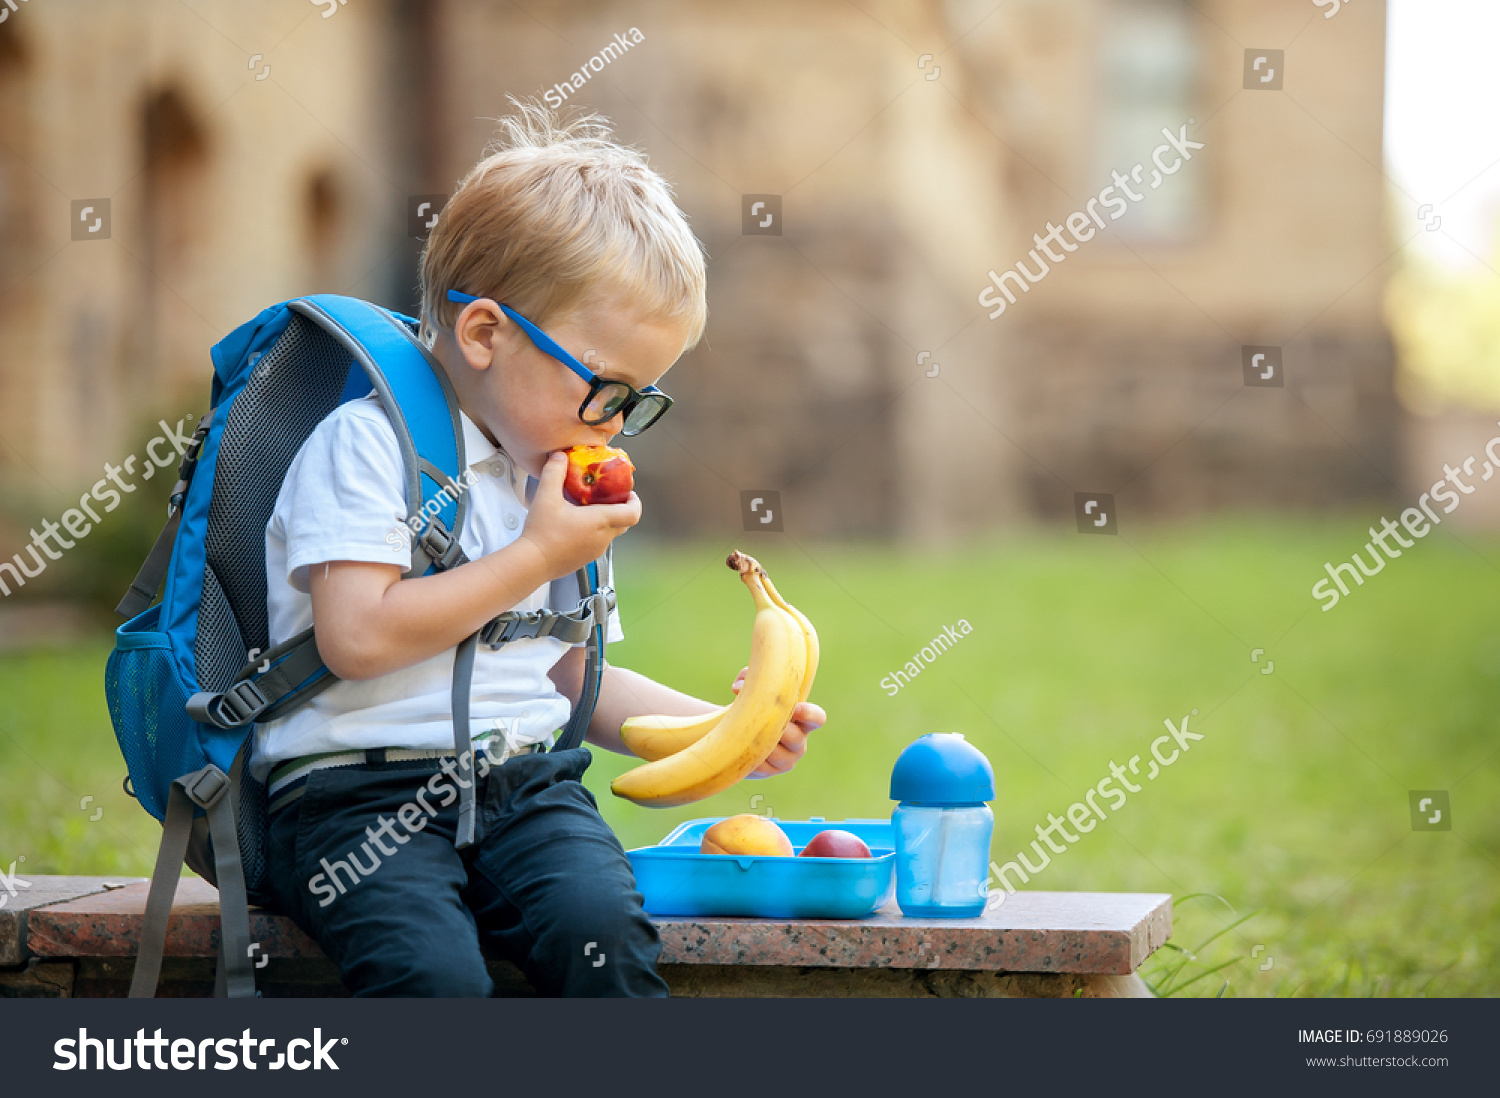 Cute schoolboy eating outdoors the school from plastick lunch boxe. Healthy school breakfast for child. Food for lunch, lunchboxes with sandwiches, fruits, vegetables, and water.  #691889026